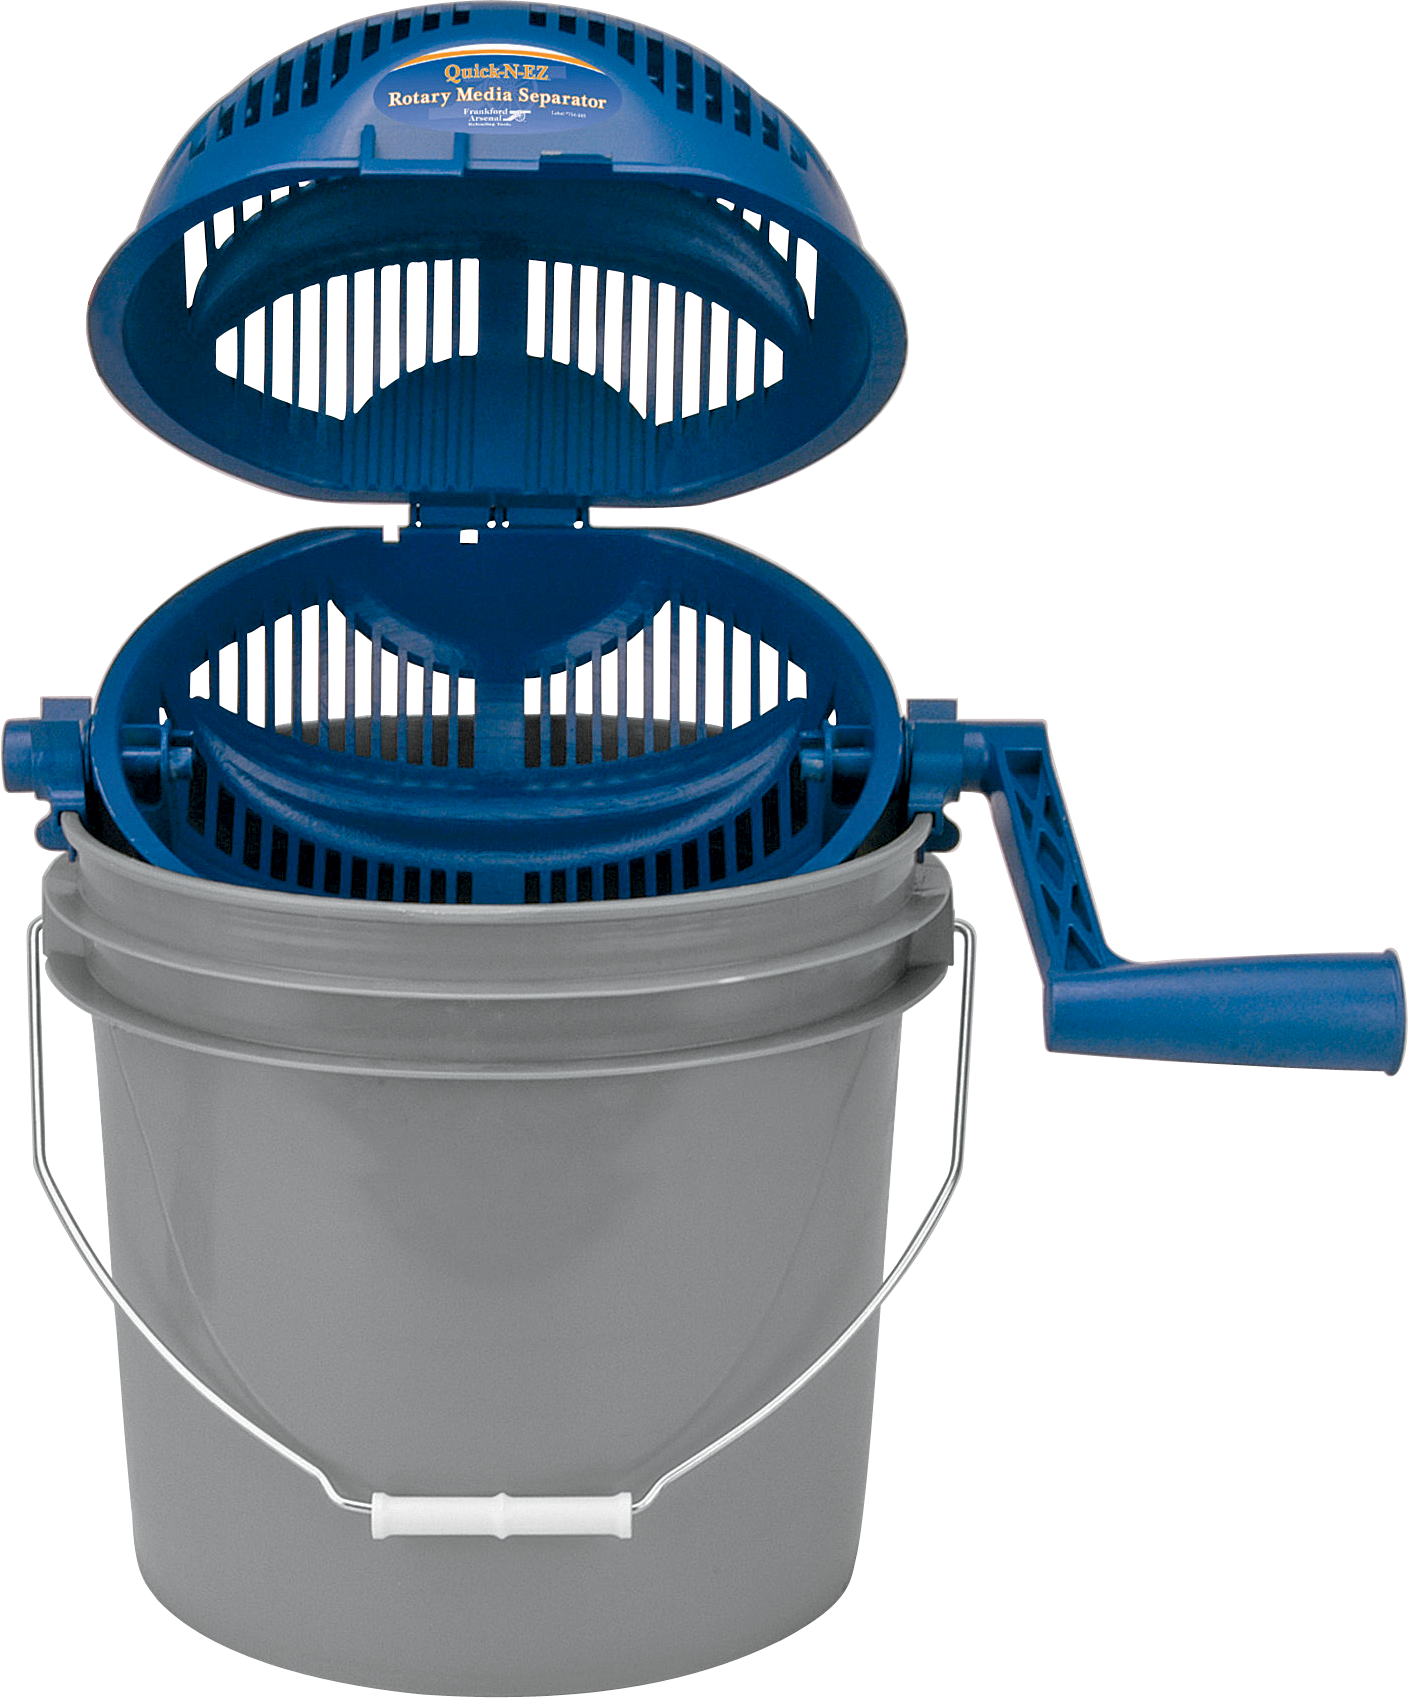 Frankford Arsenal Platinum Series Rotary Brass Tumbler 7L - $189.99 (Free  Shipping over $50)